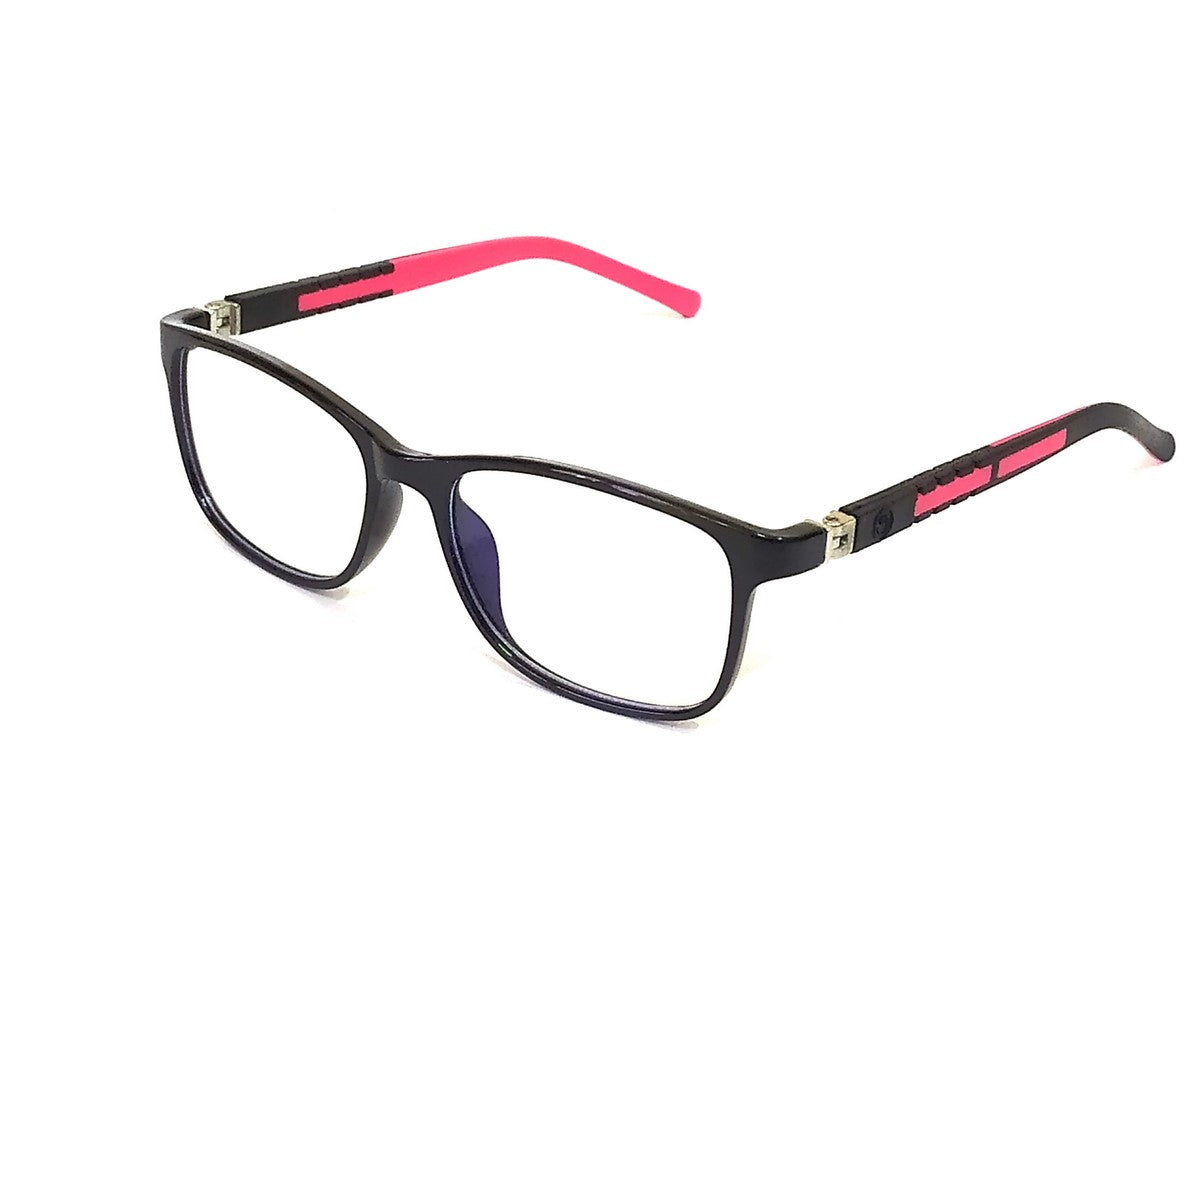 Sophisticated Black & Red Square Kids Blue Light Blocking Glasses - Perfect for Ages 6-10